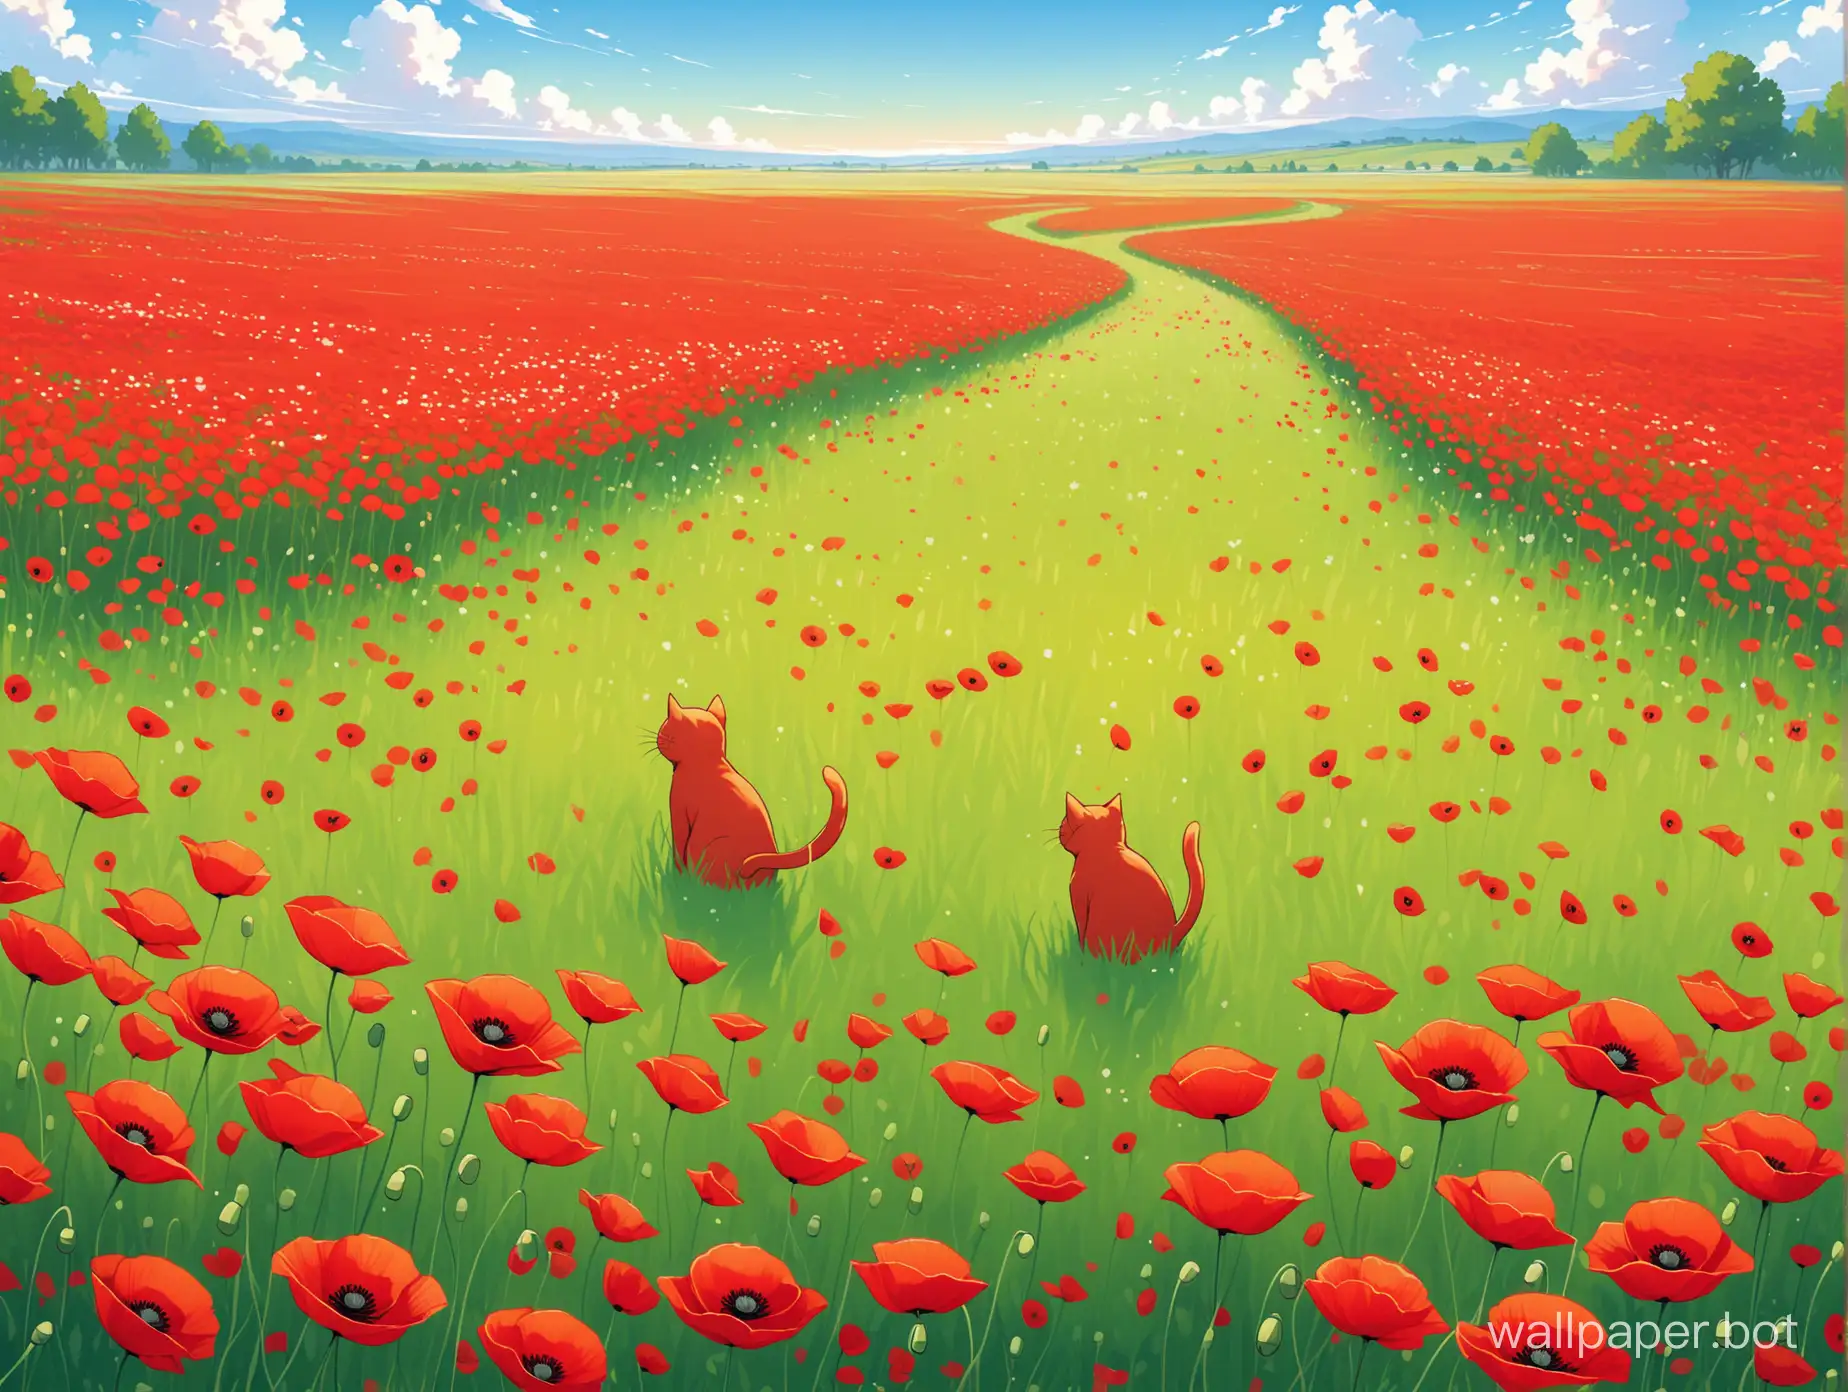 Draw a wallpaper that shows a poppy field and a red cat sitting in the middle of it in the distance